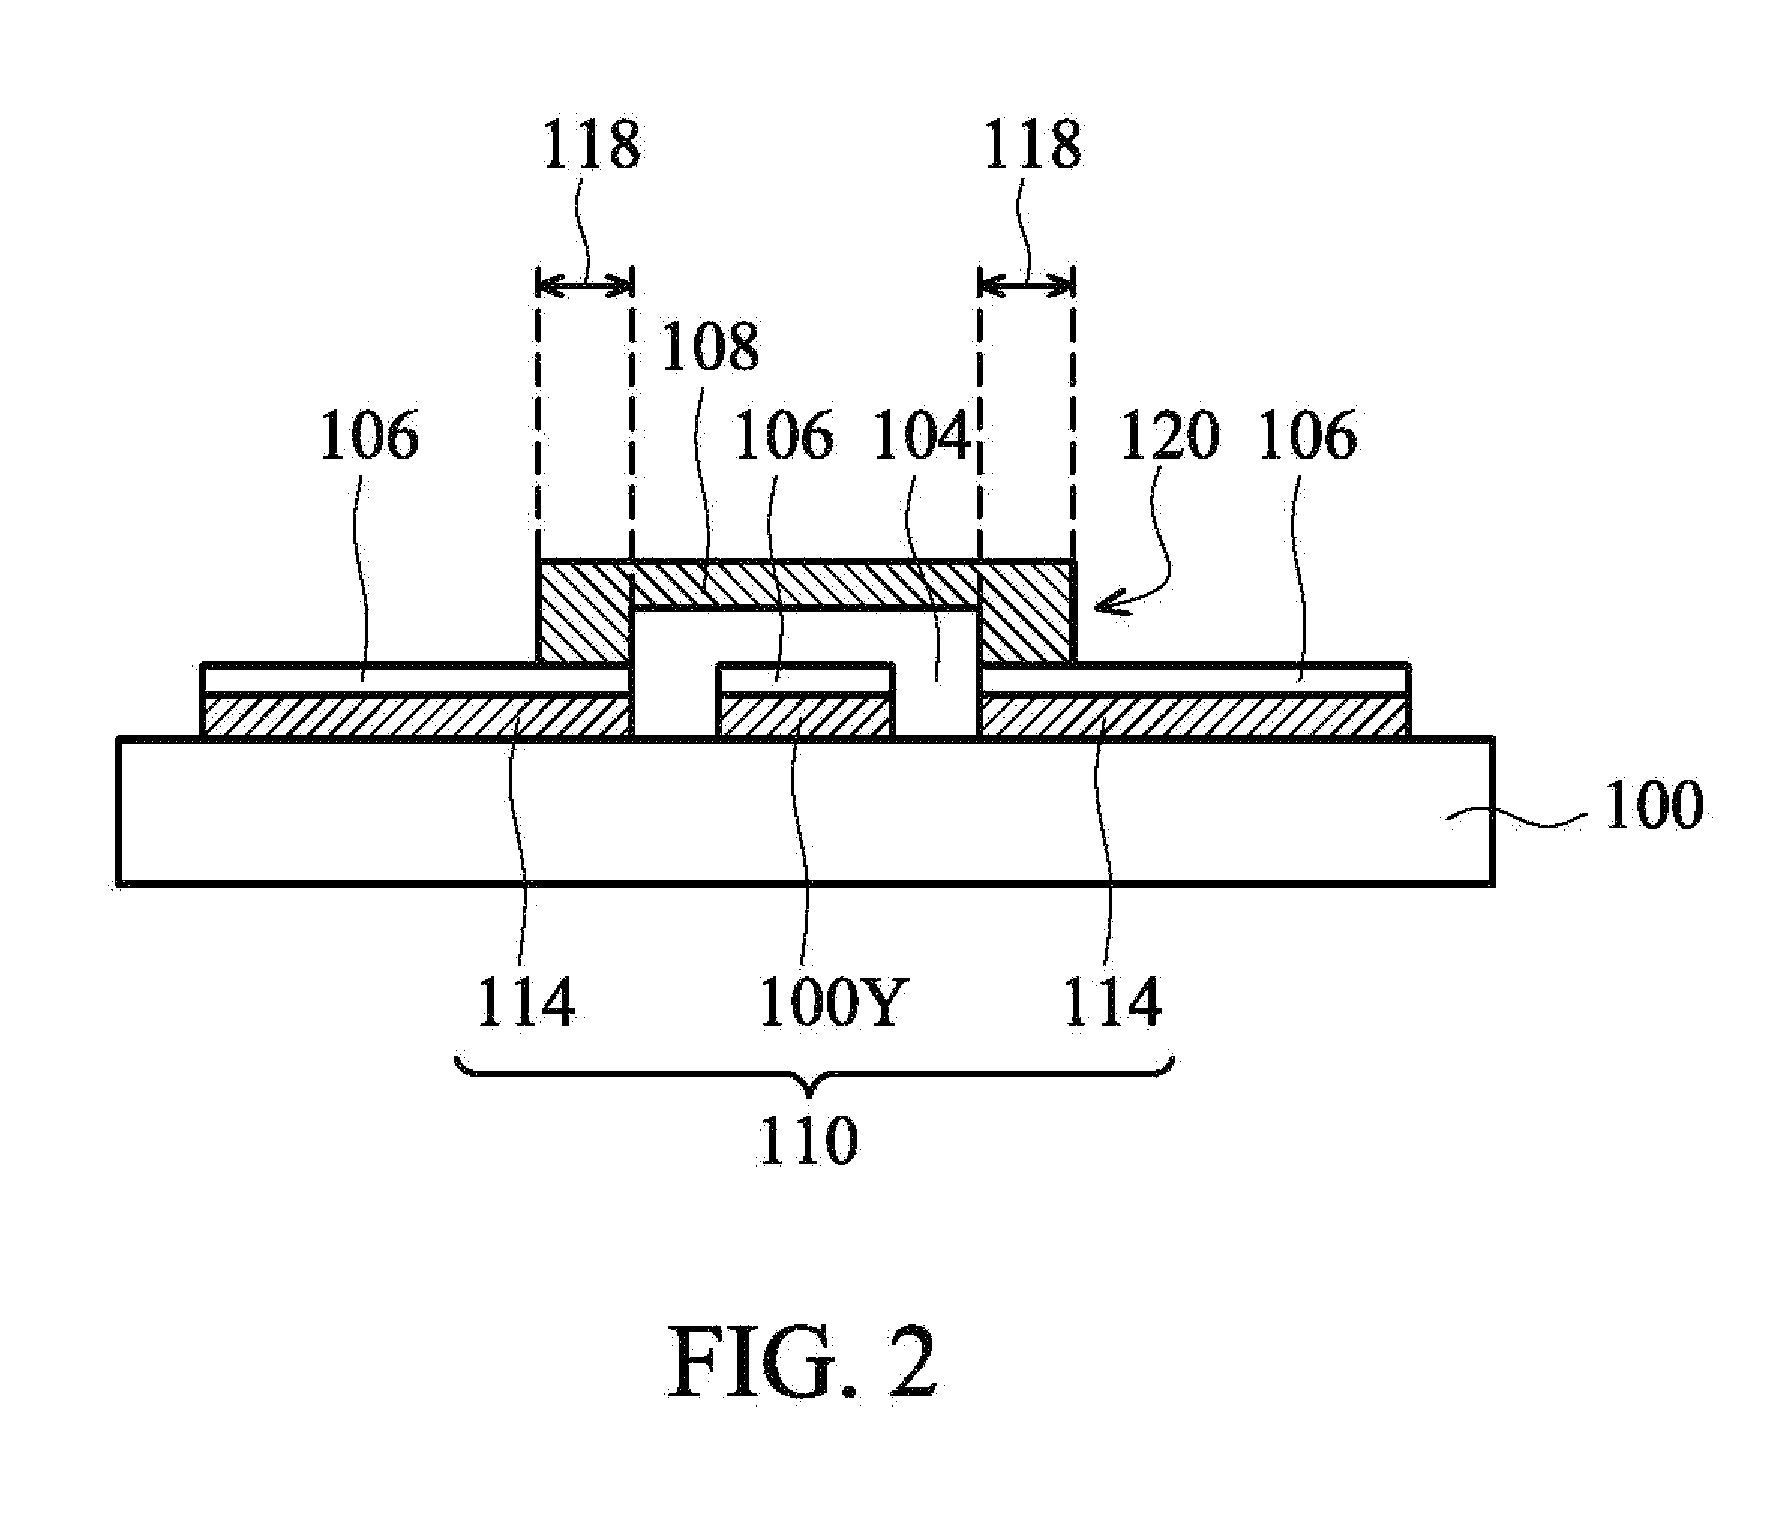 Touch-sensor structures and methods of forming the same